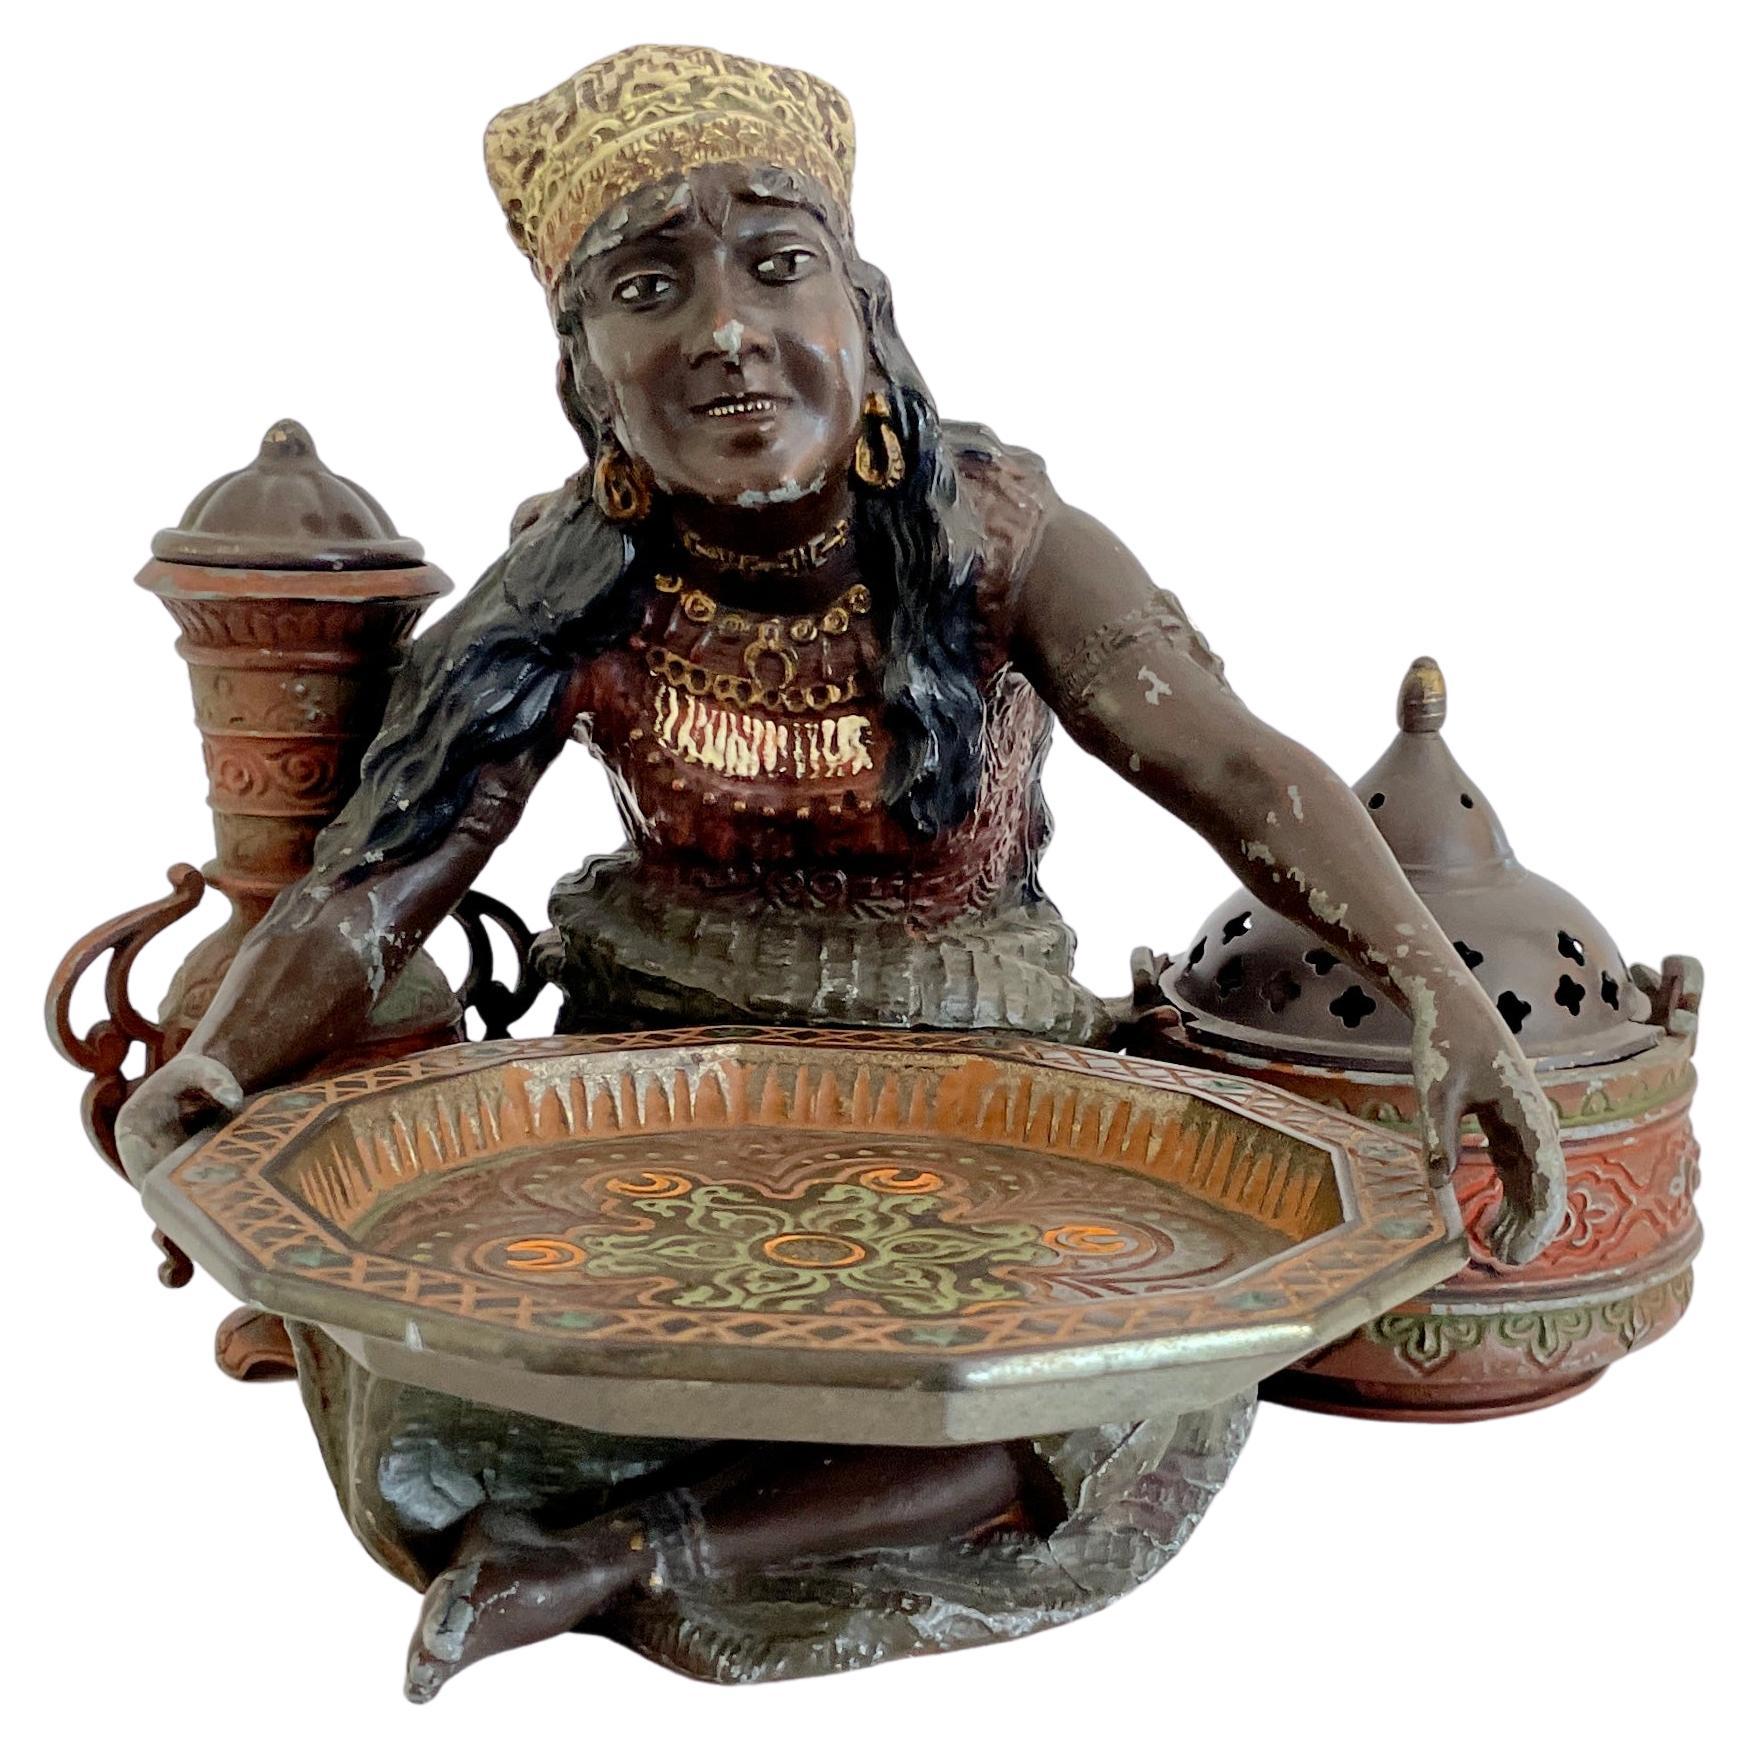 Small Metal Figurine of a North African Vendor For Sale